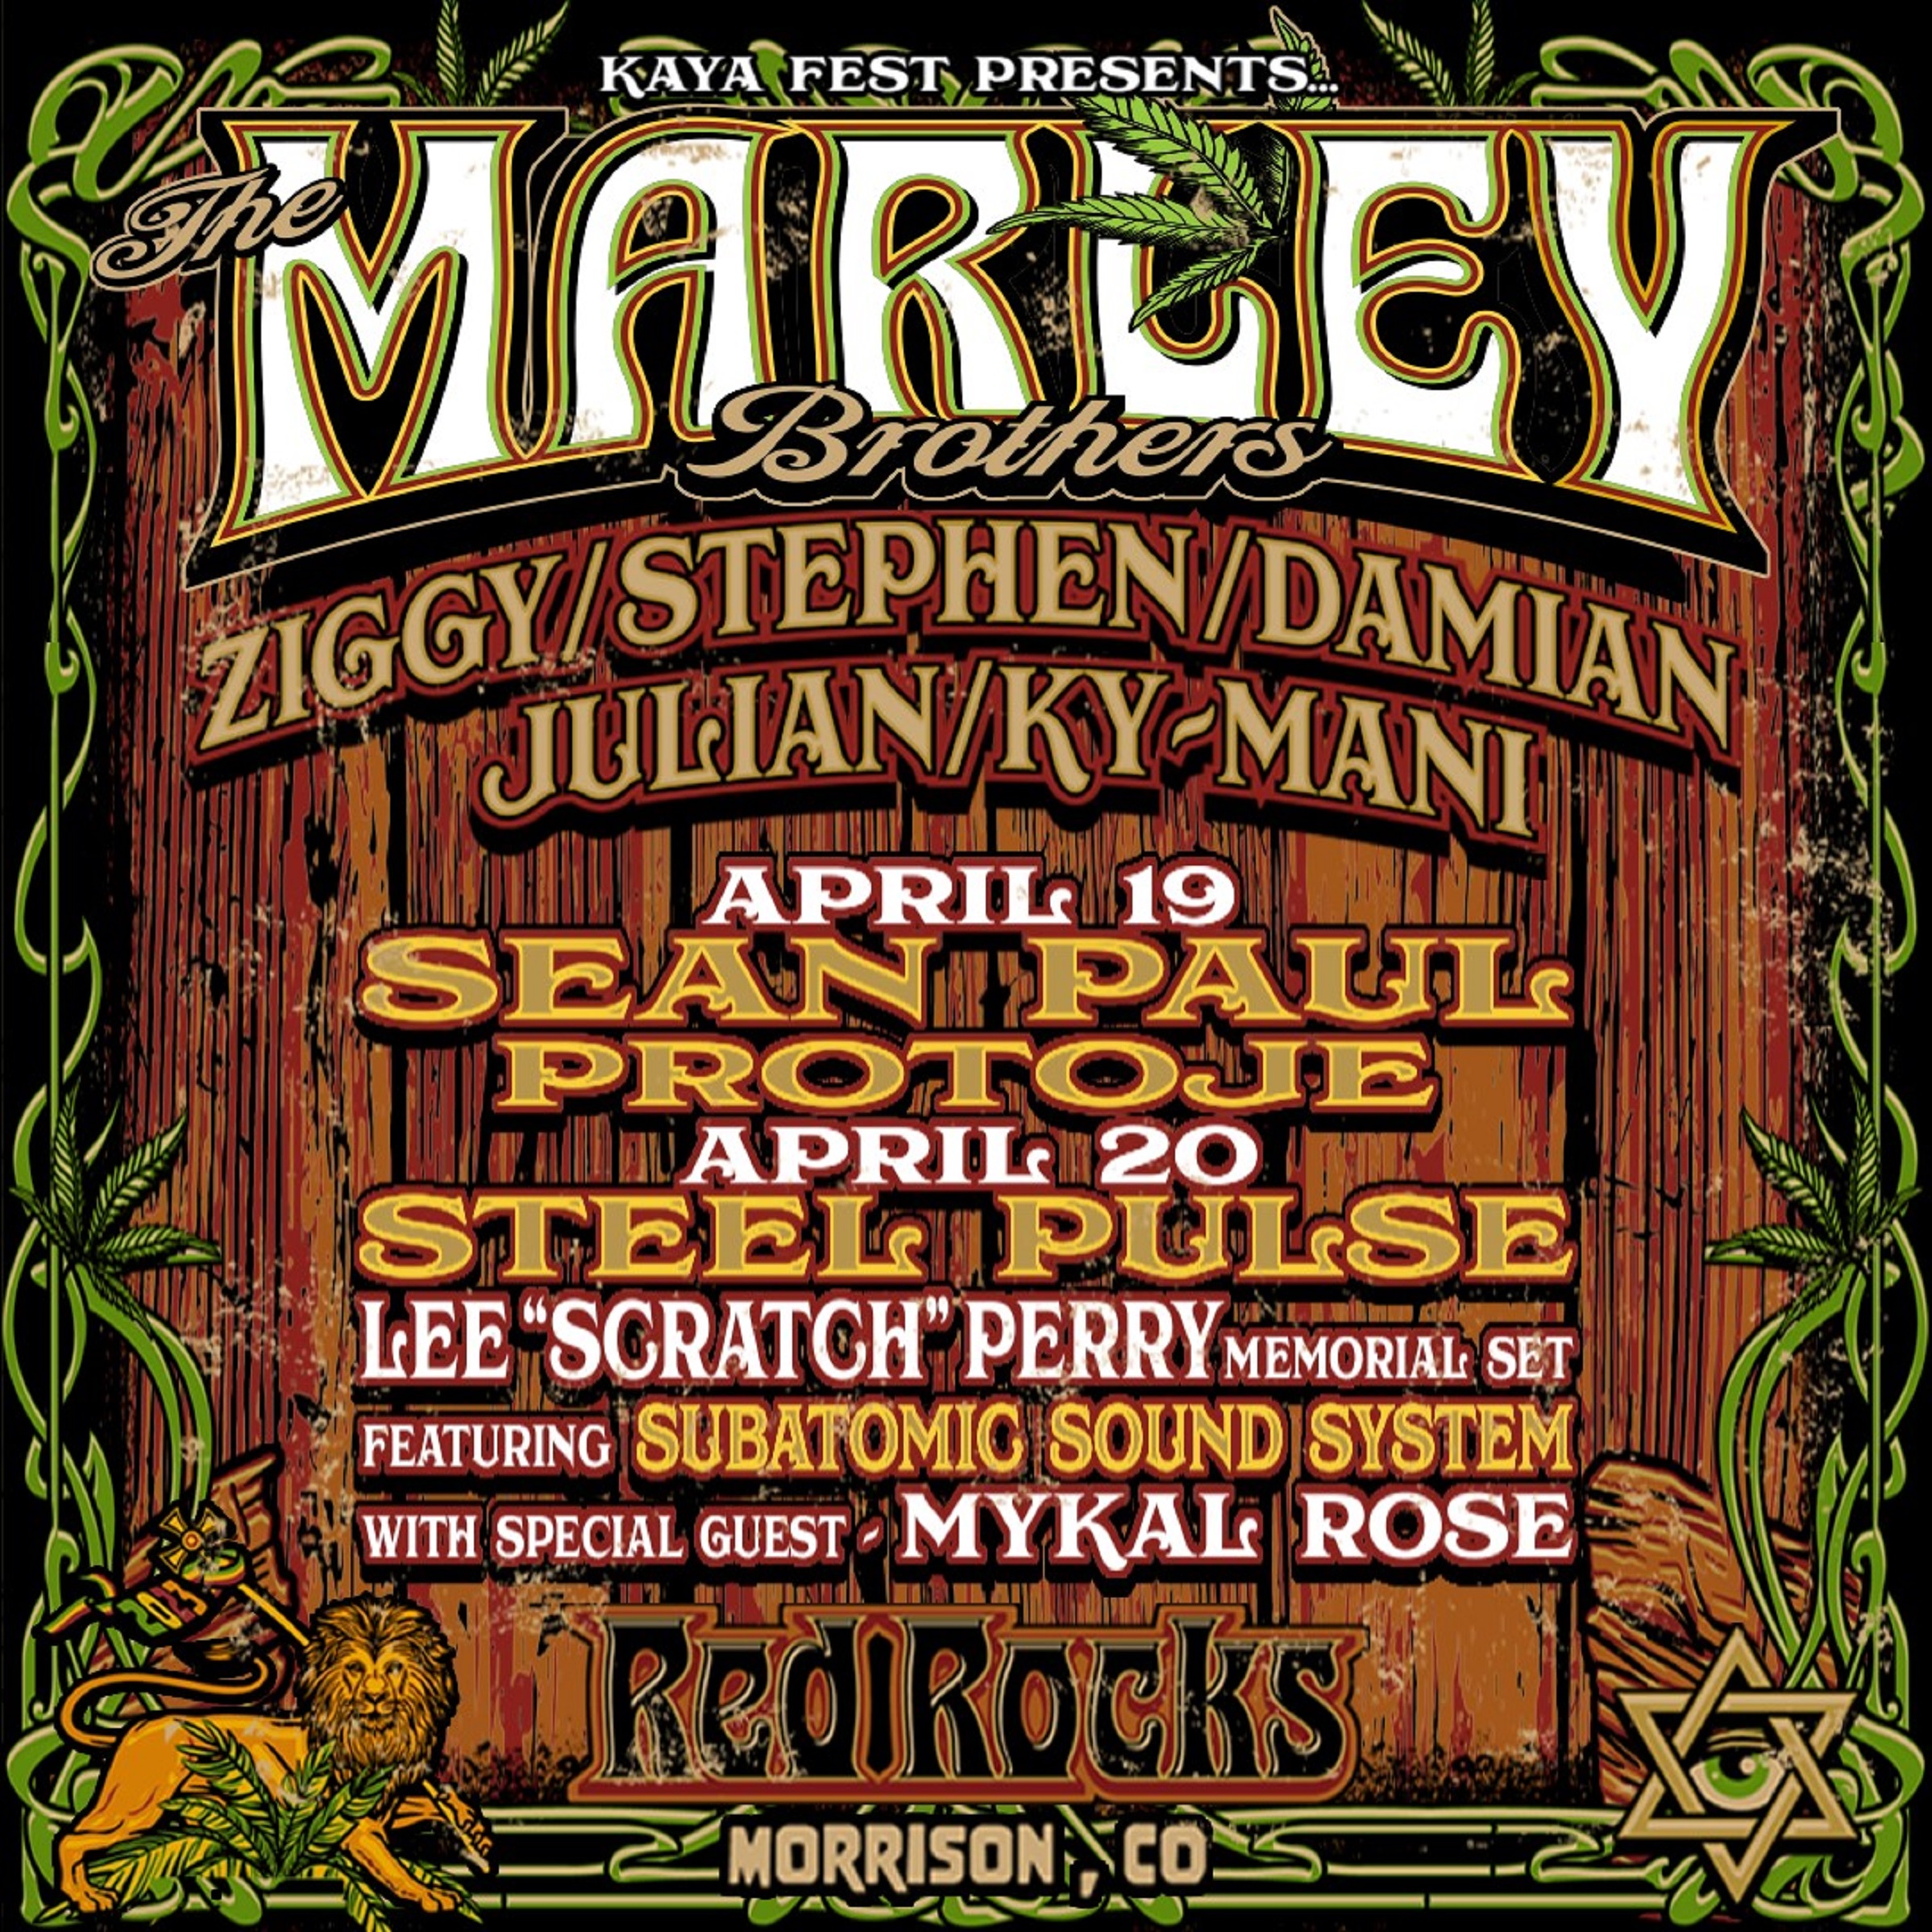 THE MARLEY BROTHERS Red Rocks Amphitheatre April 19 + 20, 2023